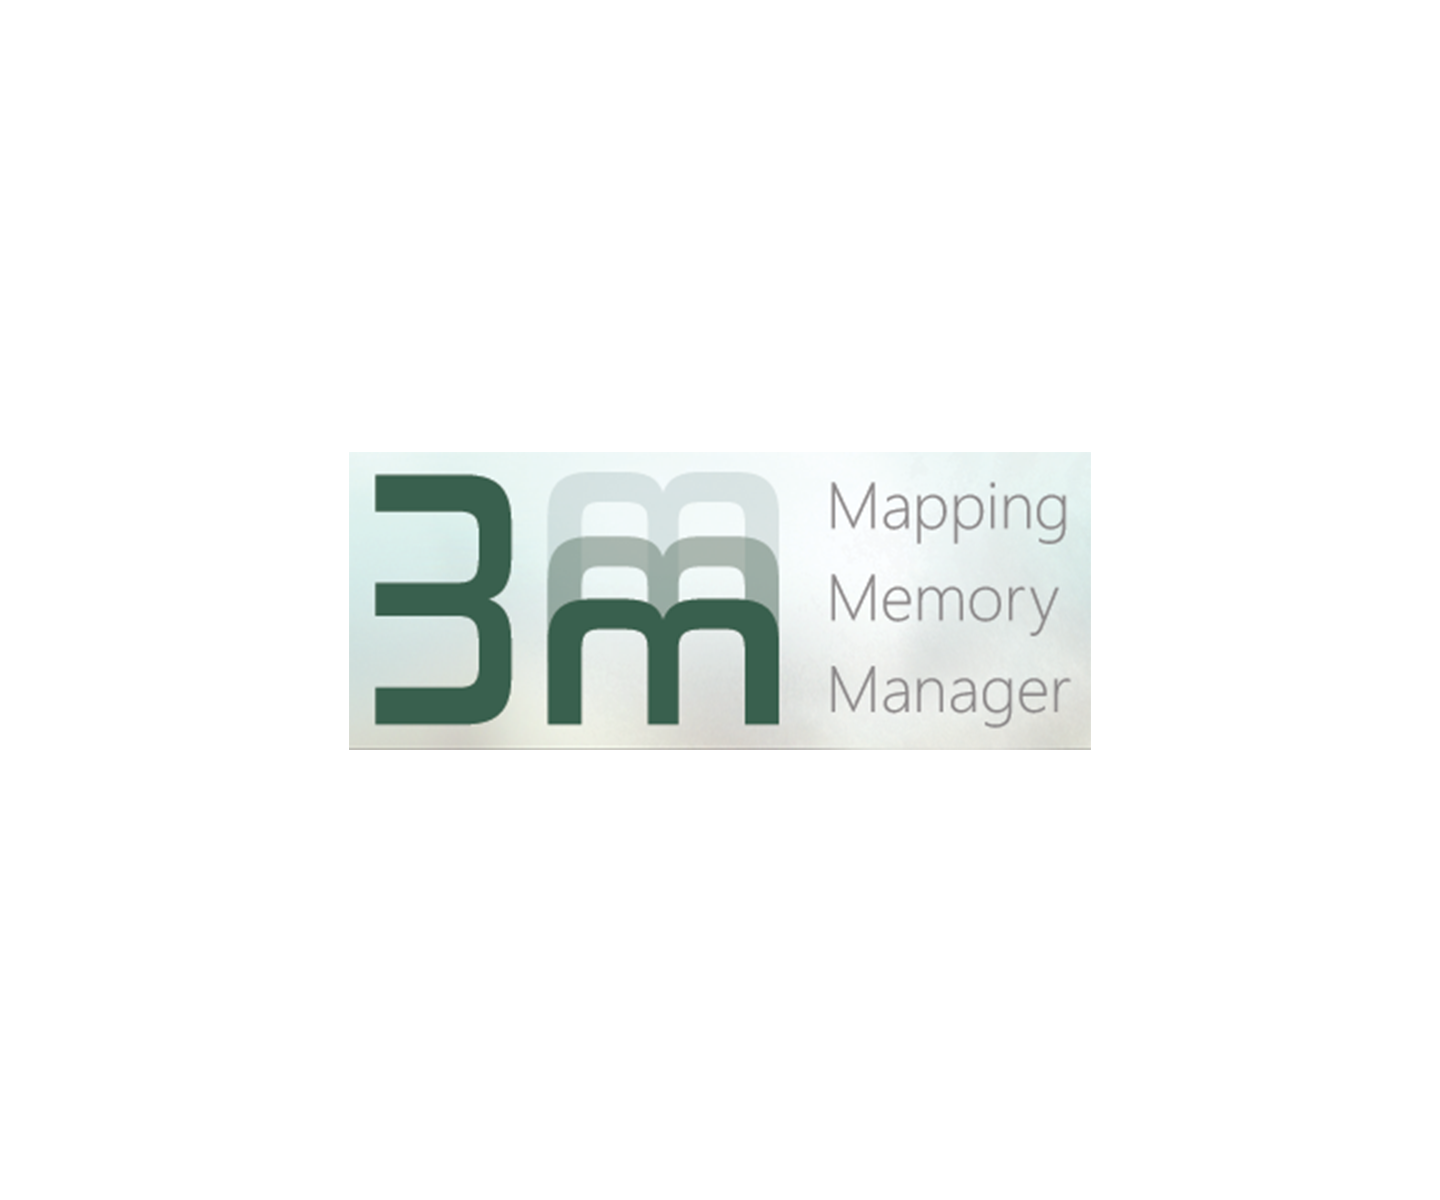 Mapping Memory Manager (3M)